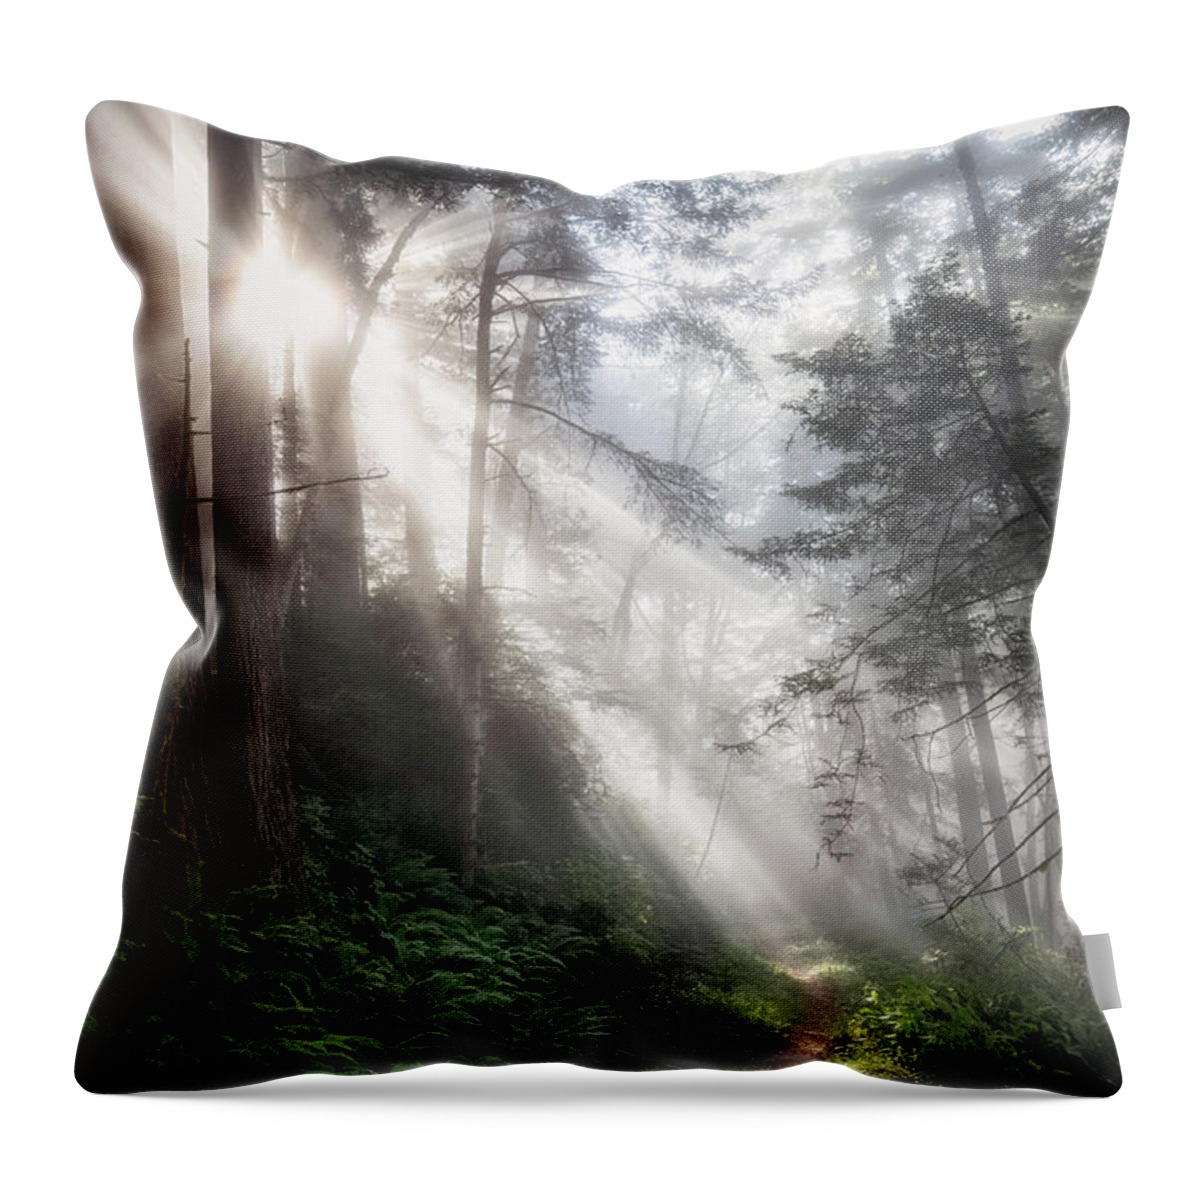 Alder Throw Pillow featuring the photograph Mist On Last Chance Coastal Trail 4 by Al Andersen